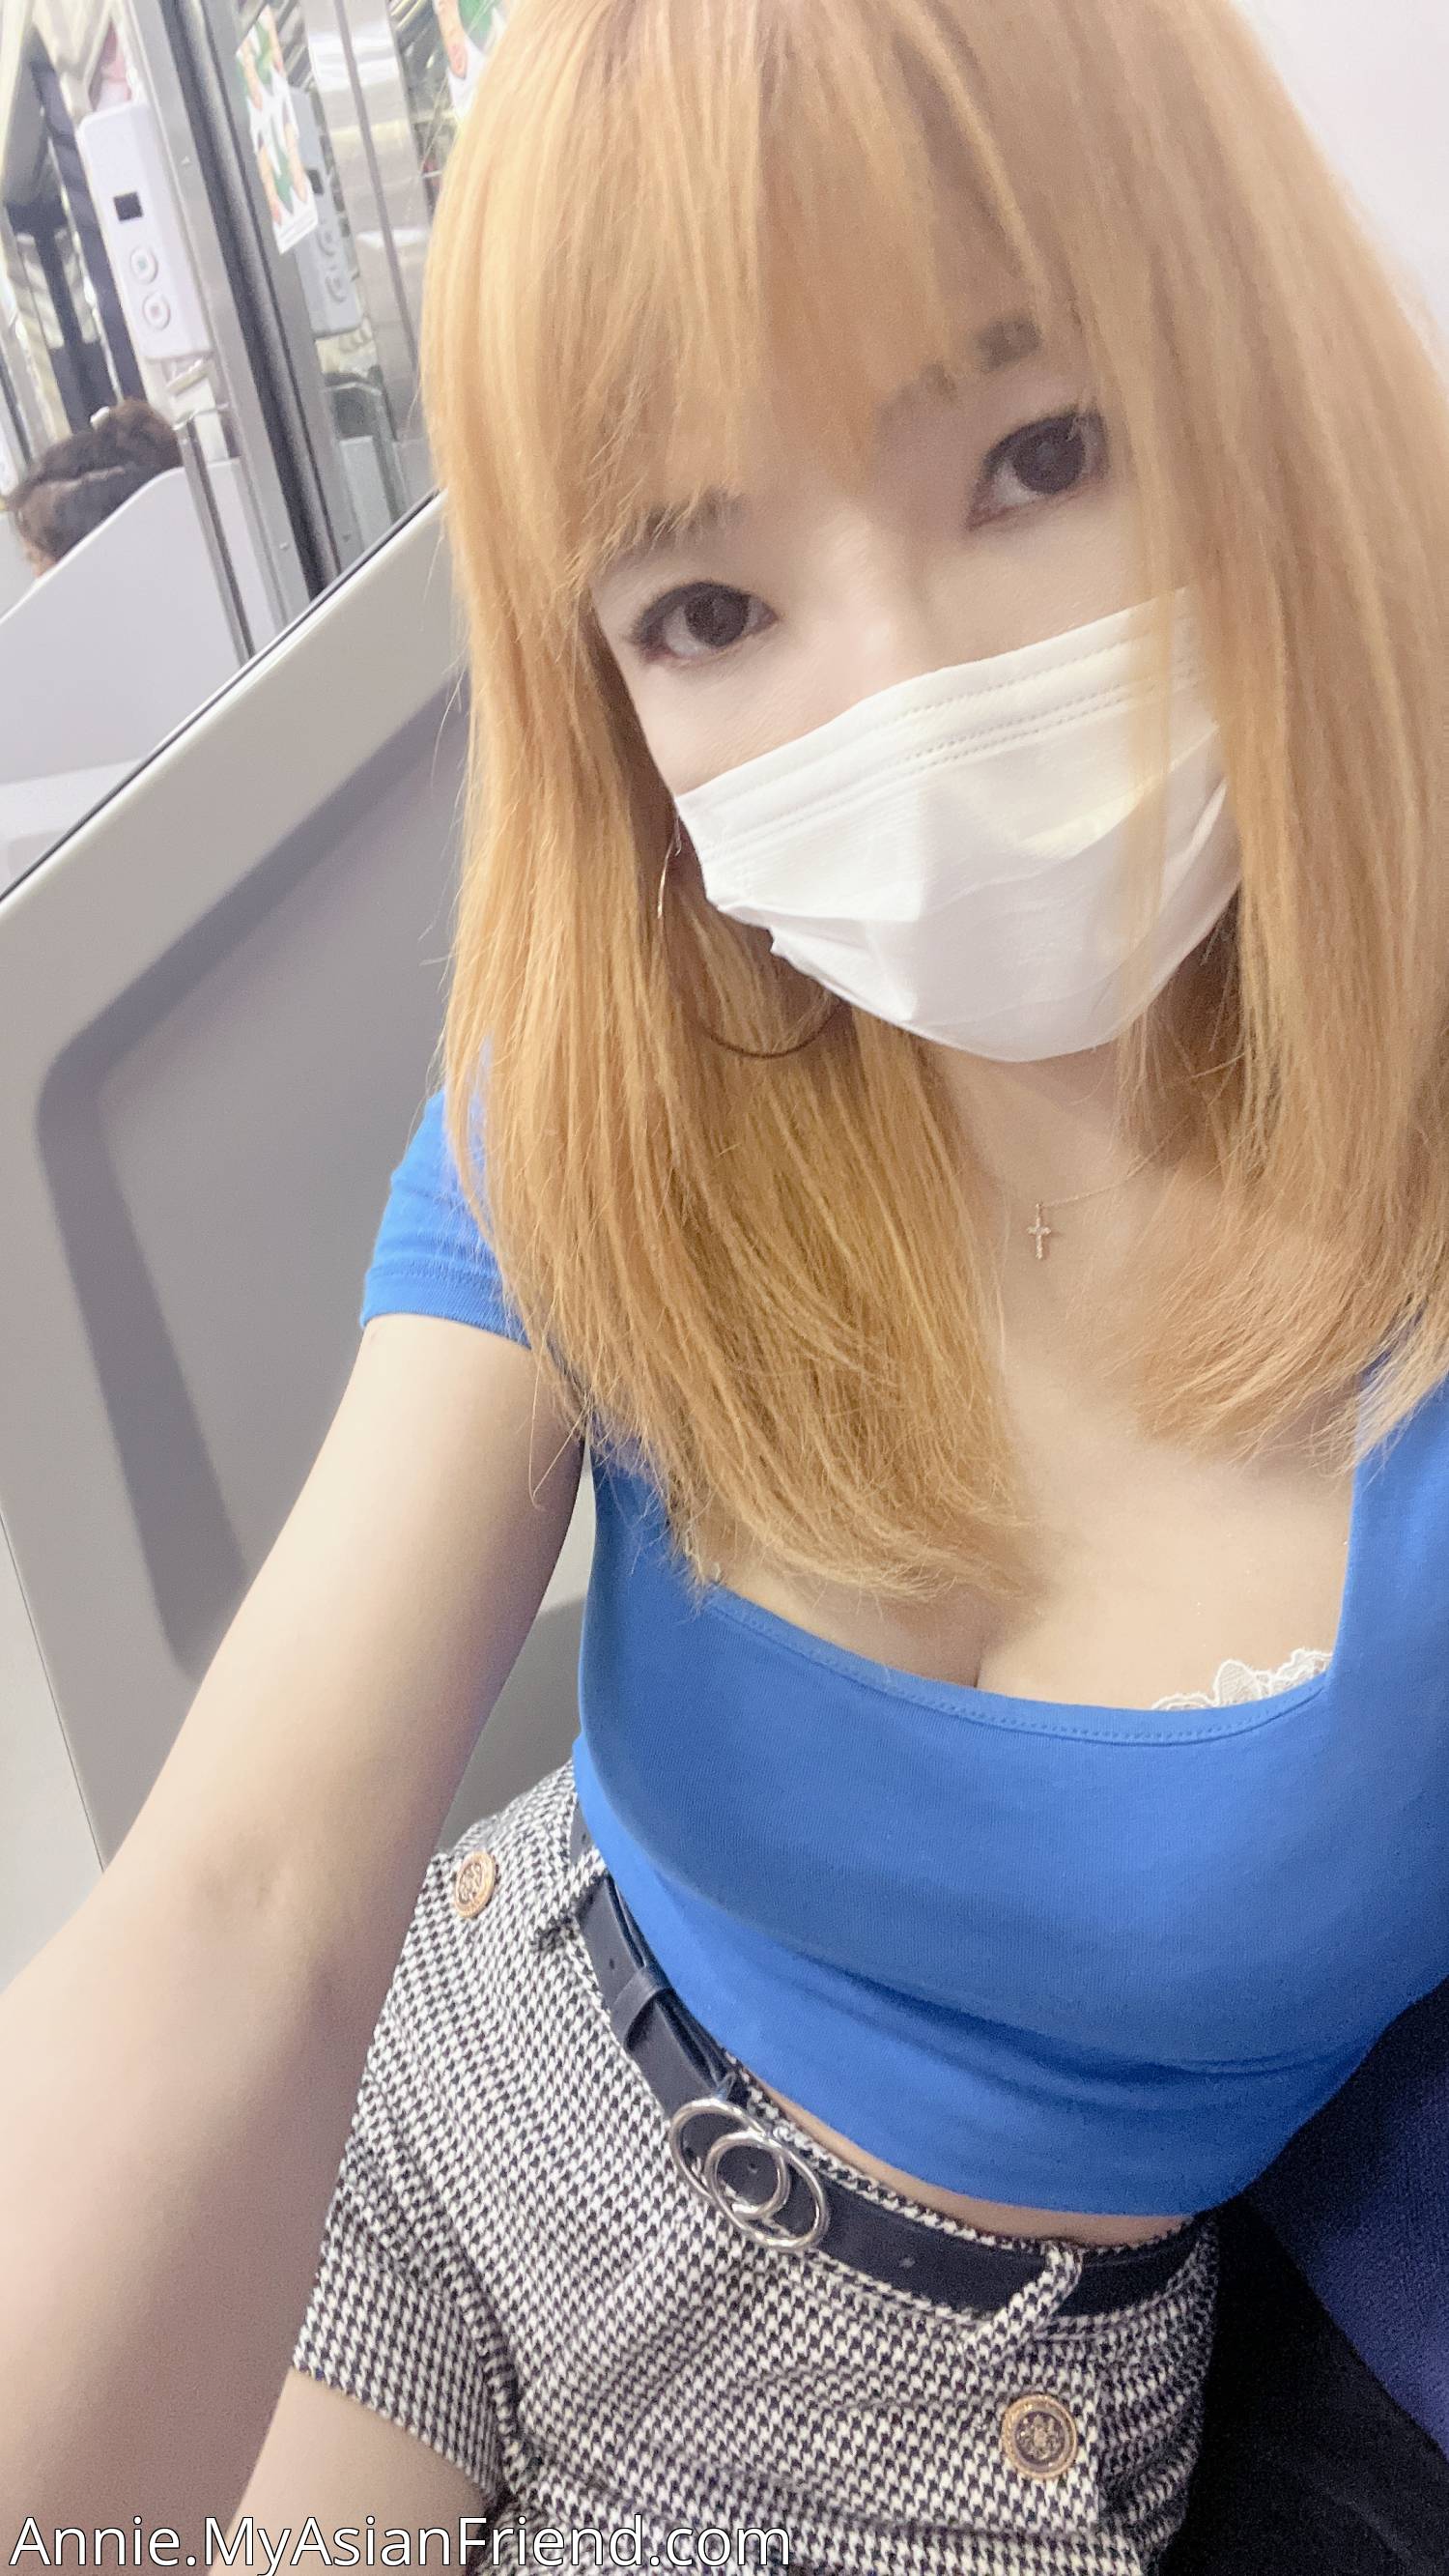 Annie's personal blog photo 1 added Sunday the 11th of September 2022